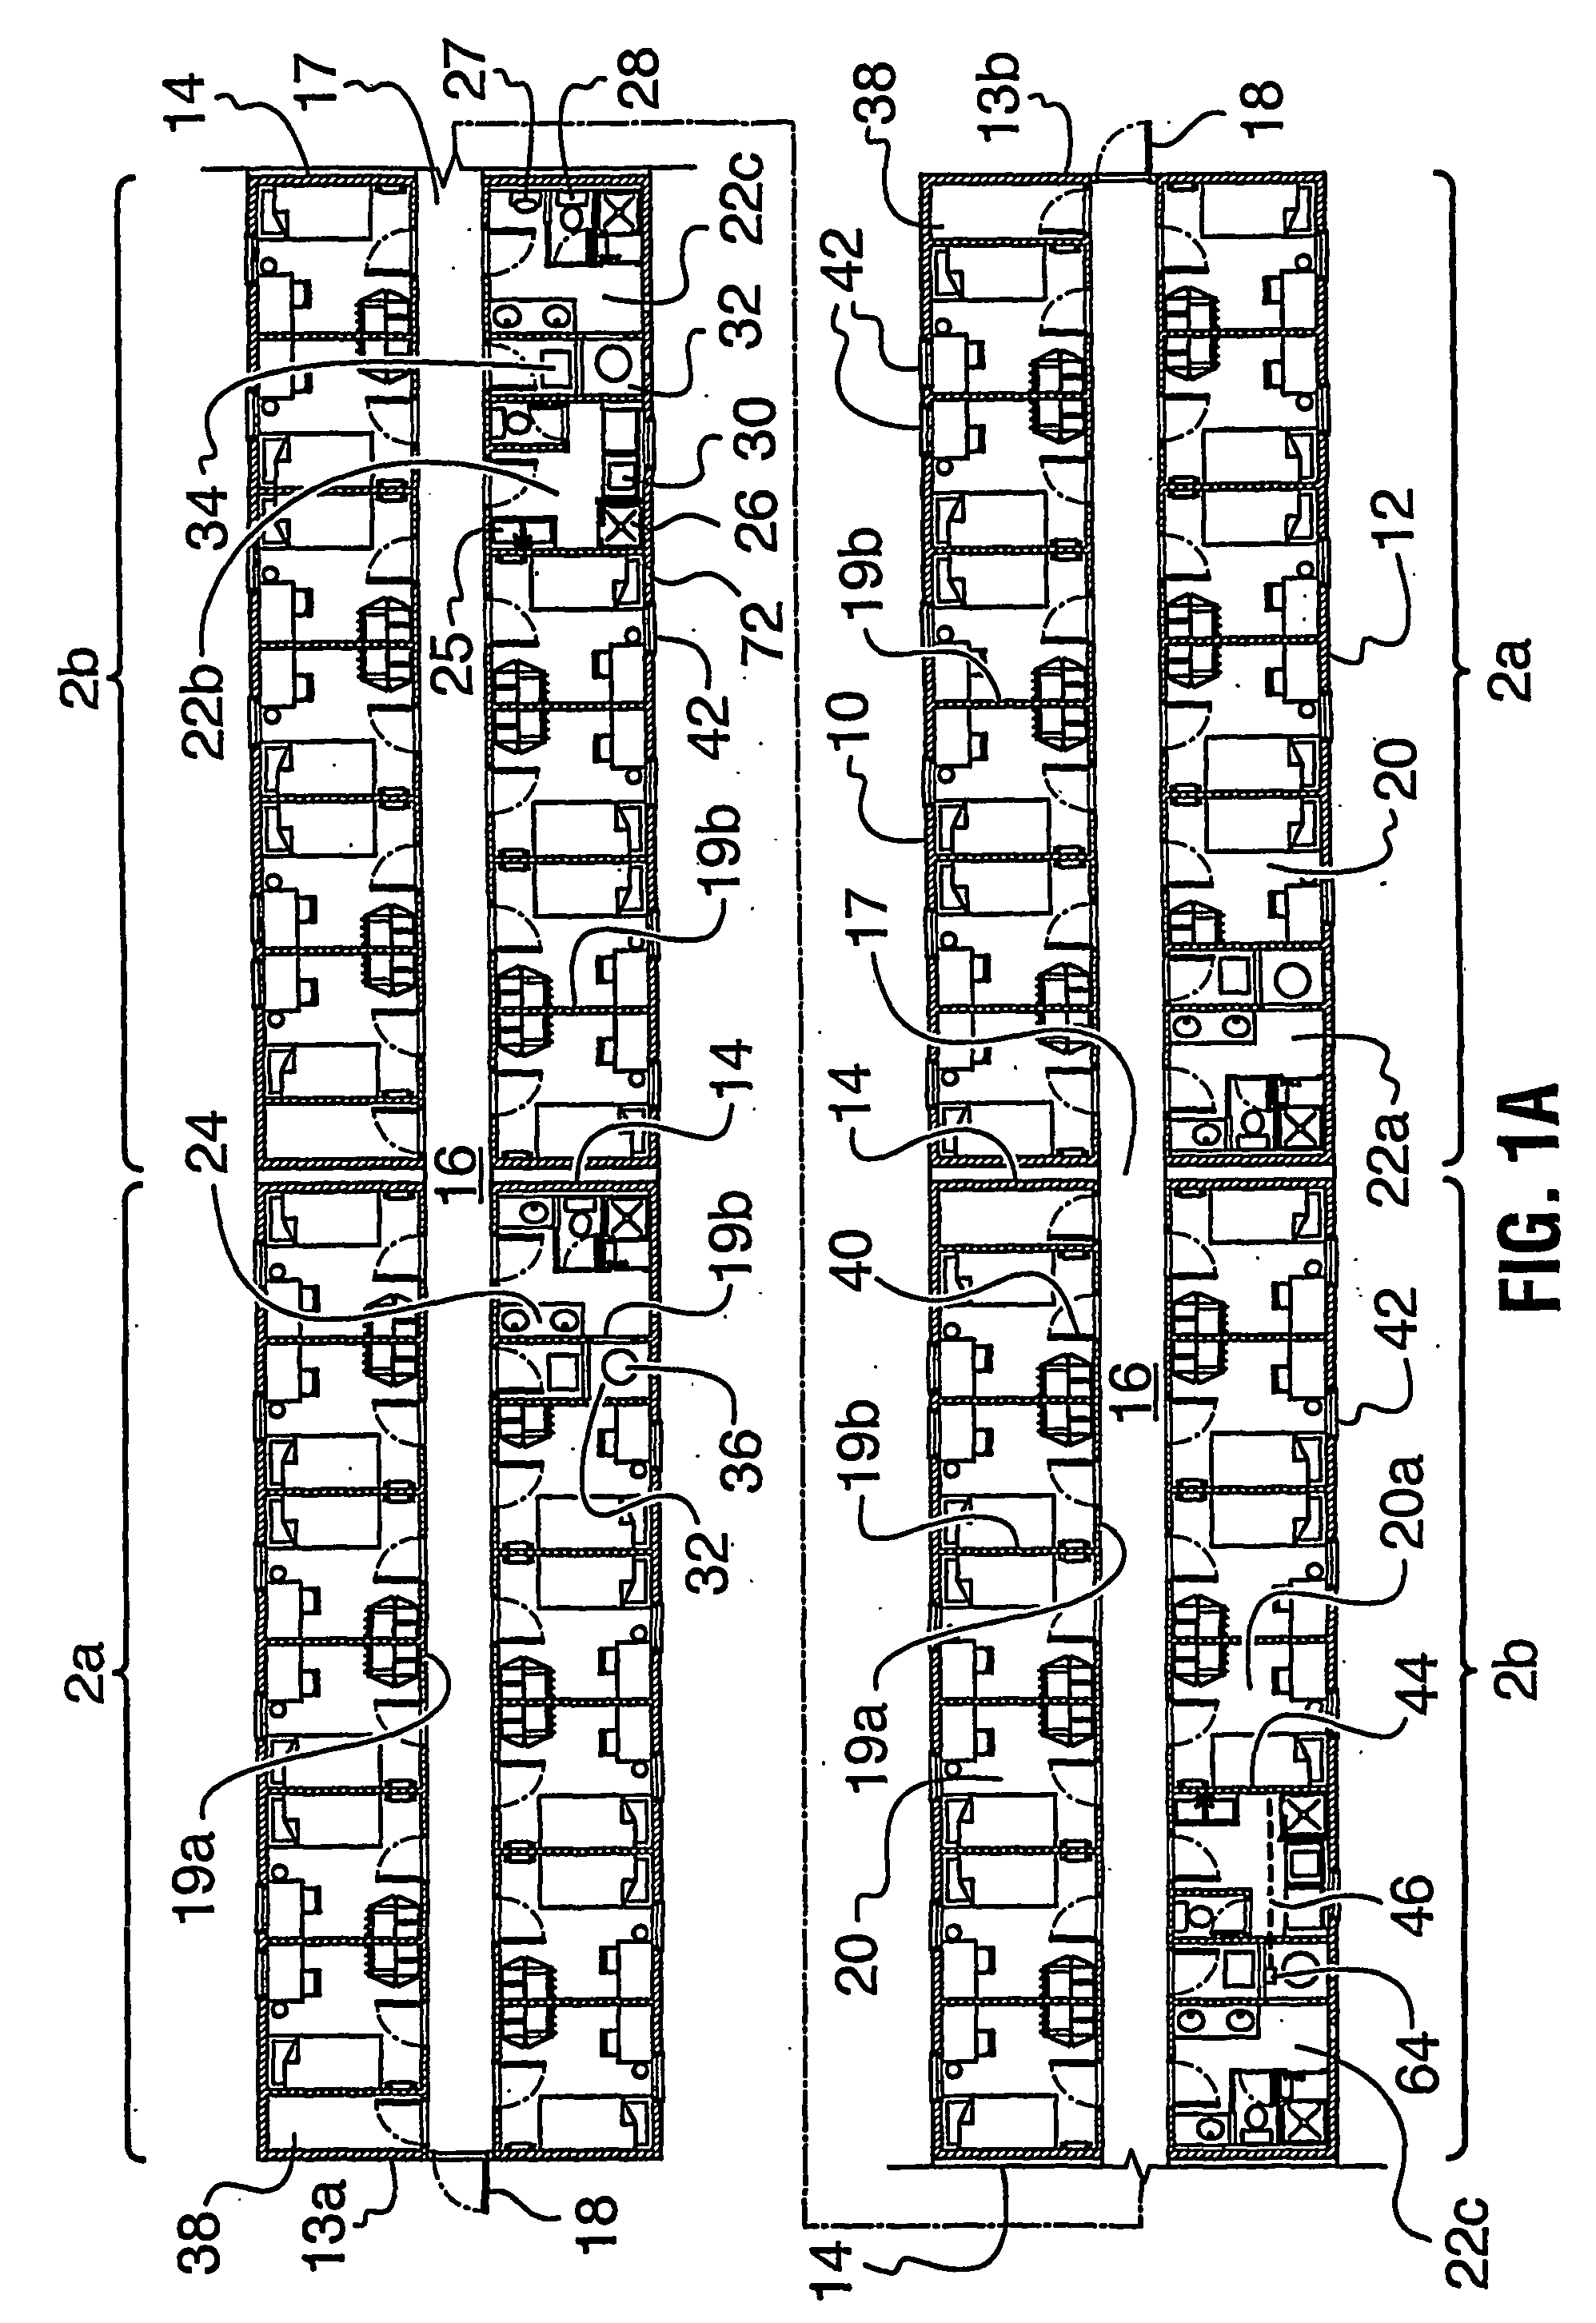 Reusable worker housing and methods relating thereto